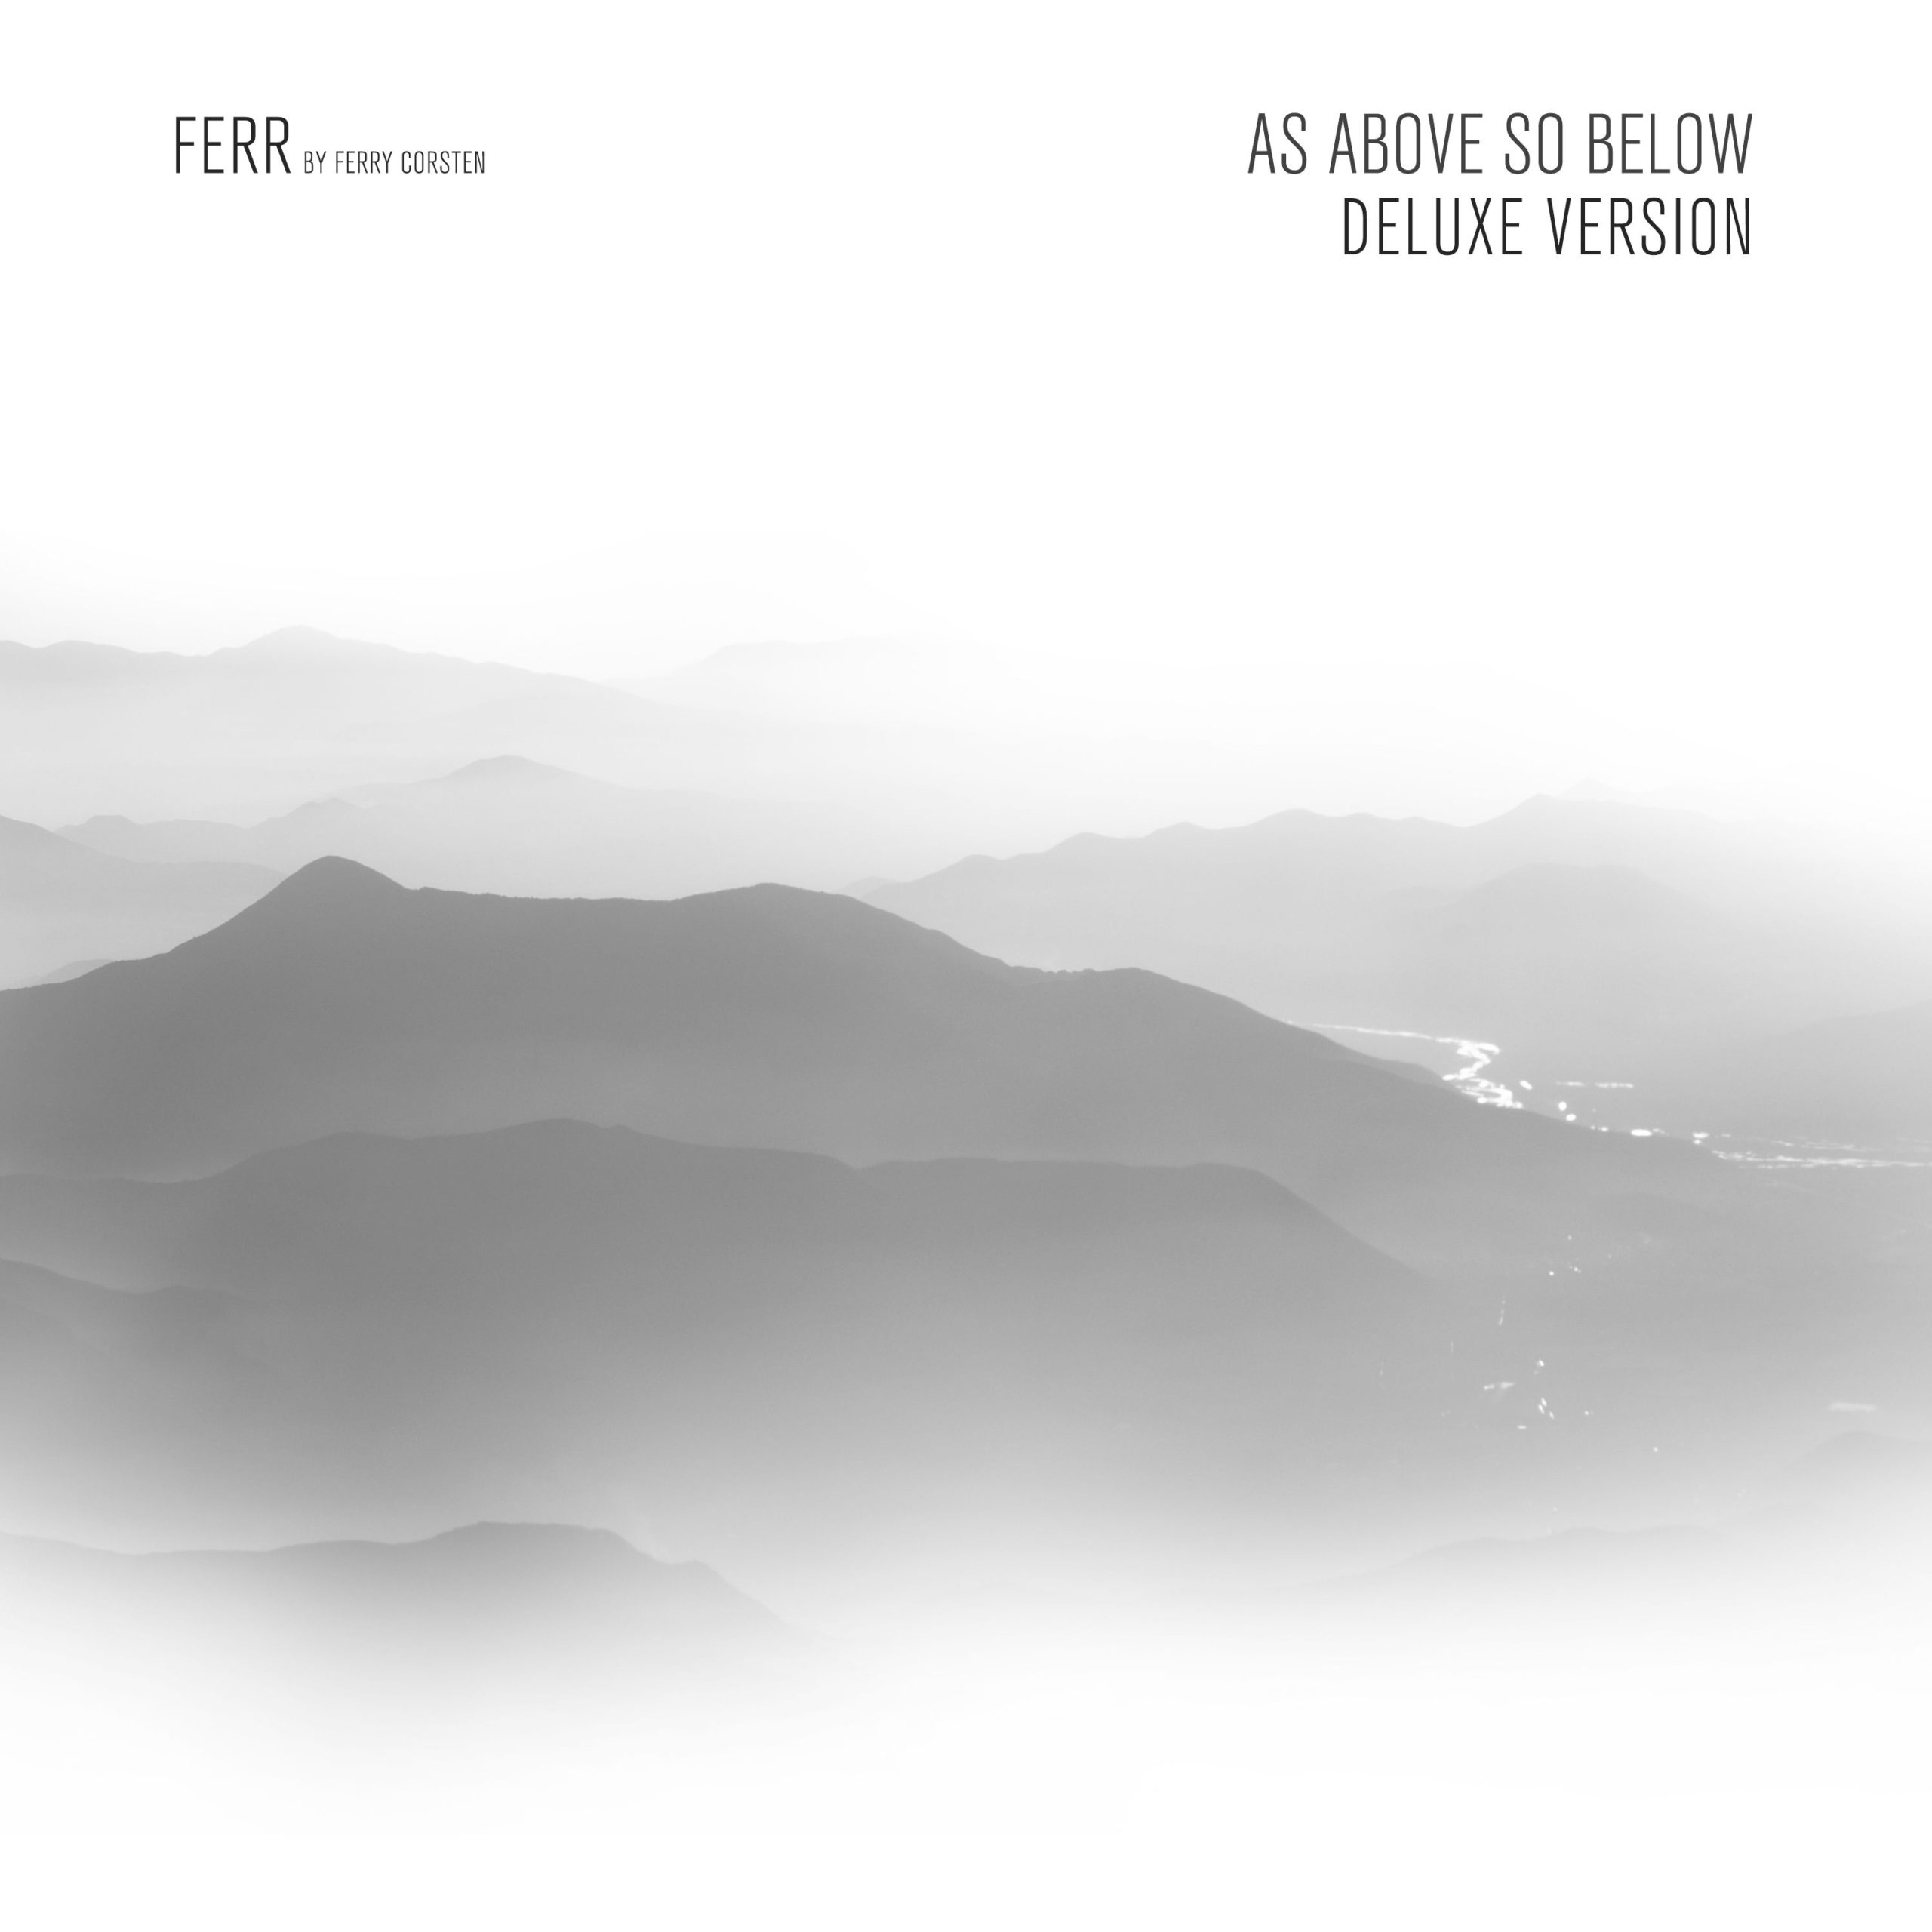 FERR by Ferry Corsten presents As Above So Below (Deluxe Version) on Armada Music